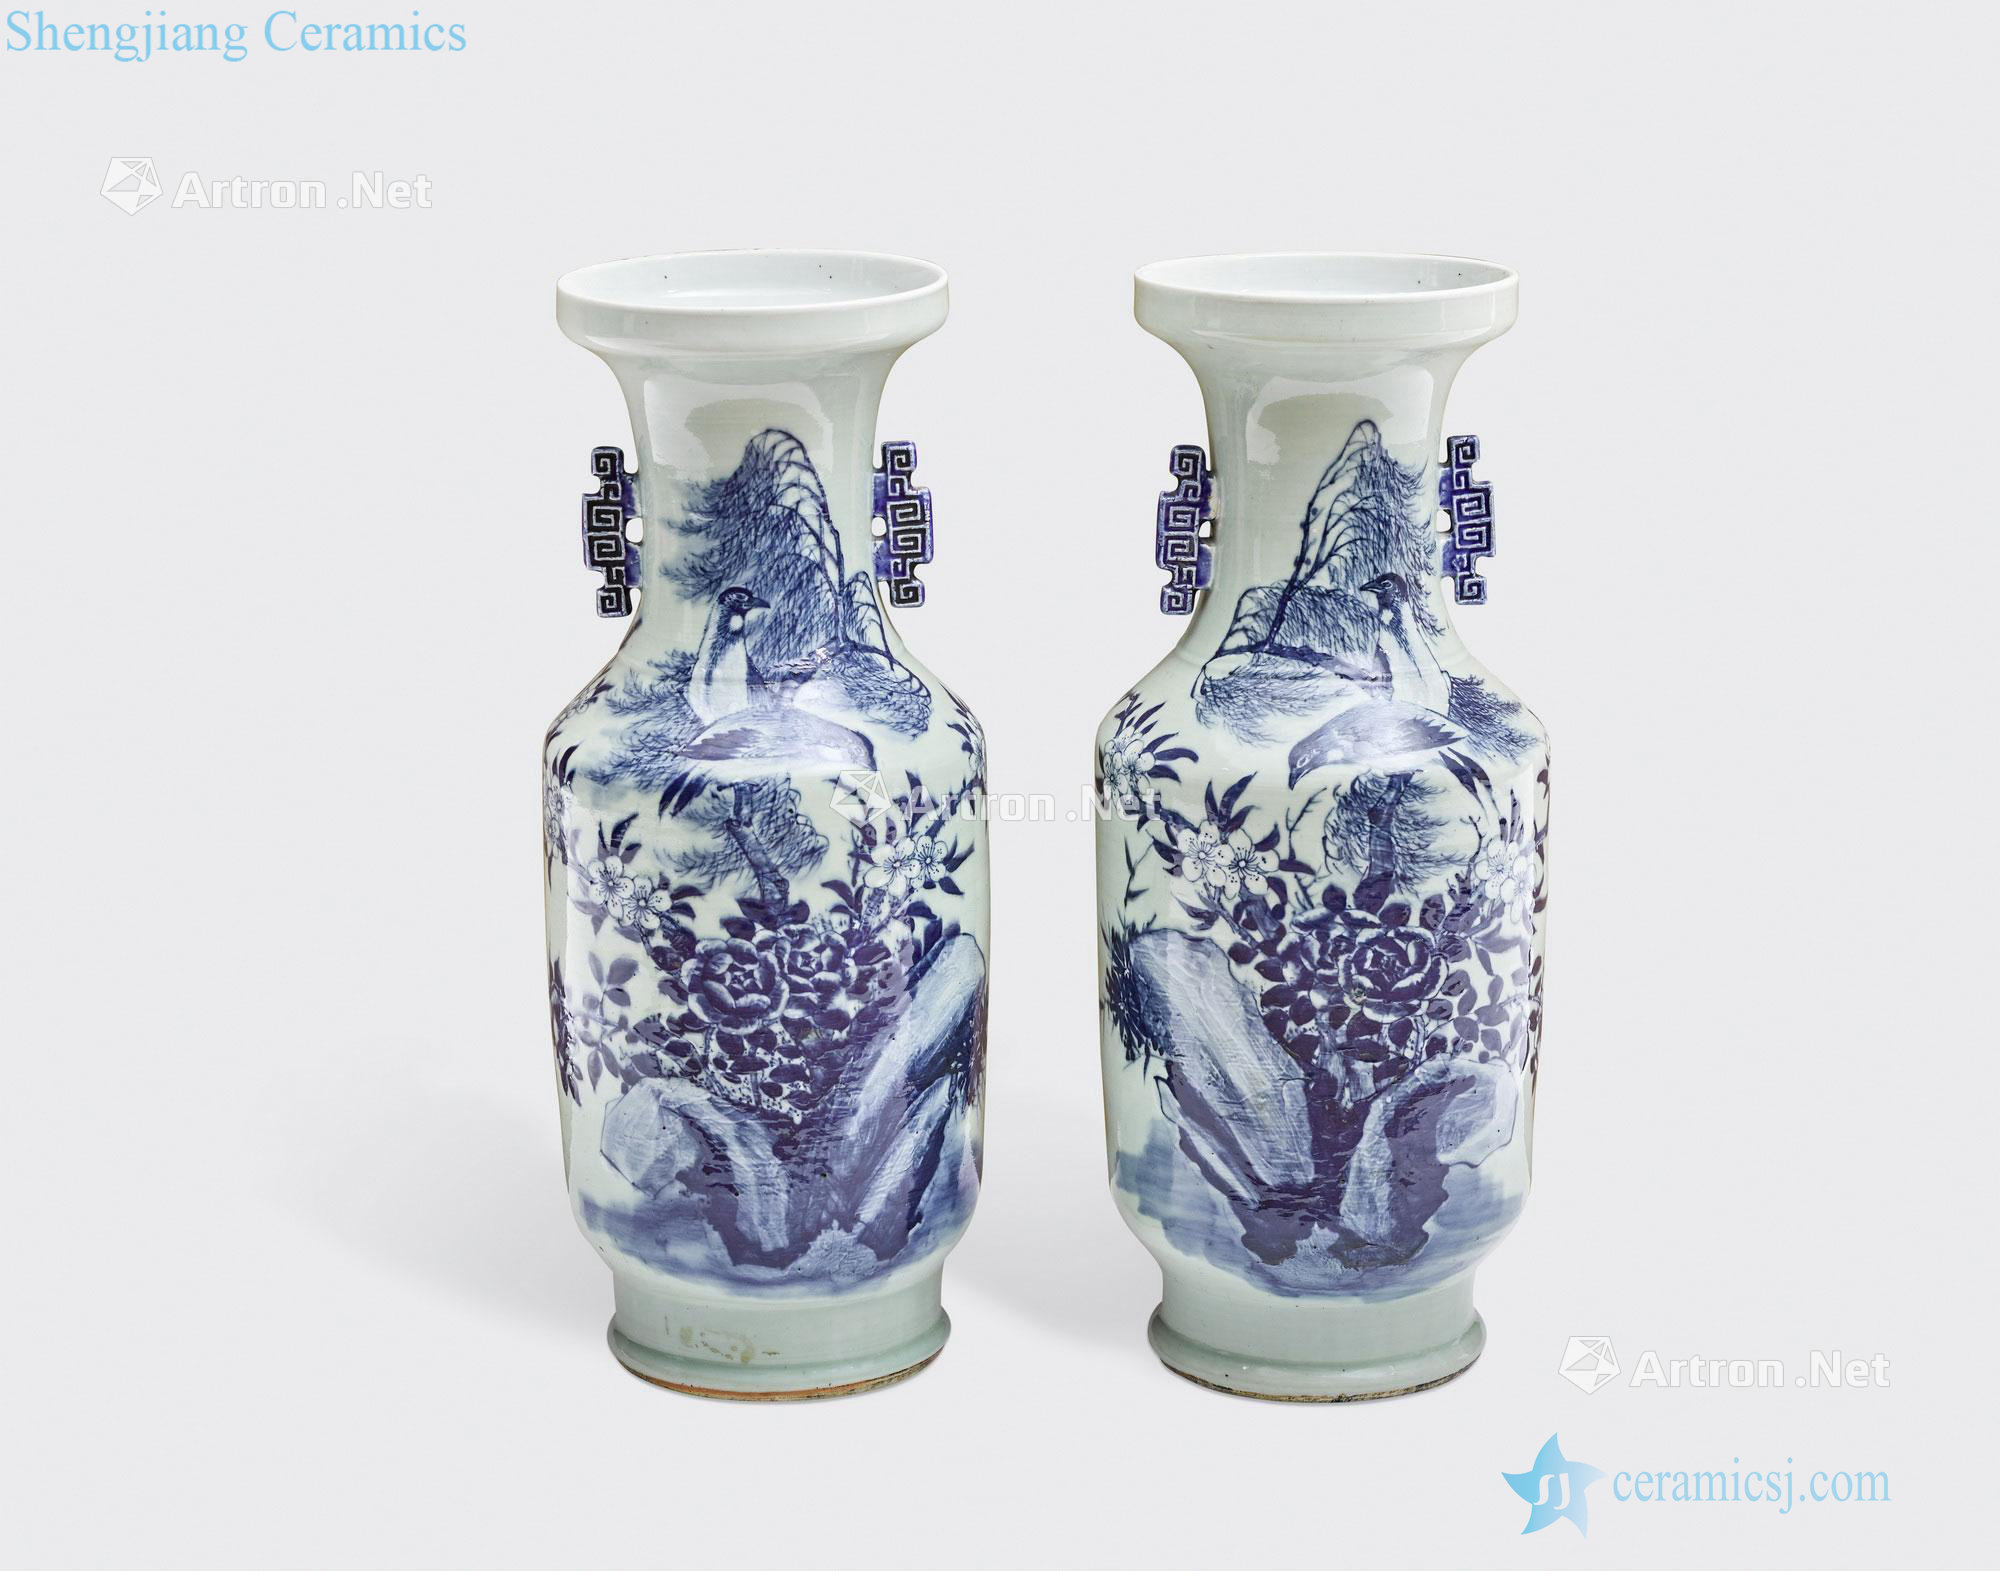 Newest the Qing/Republic period A PAIR OF CELADON GLAZED VASES WITH UNDERGLAZE BLUE AND WHITE SLIP DECORATION